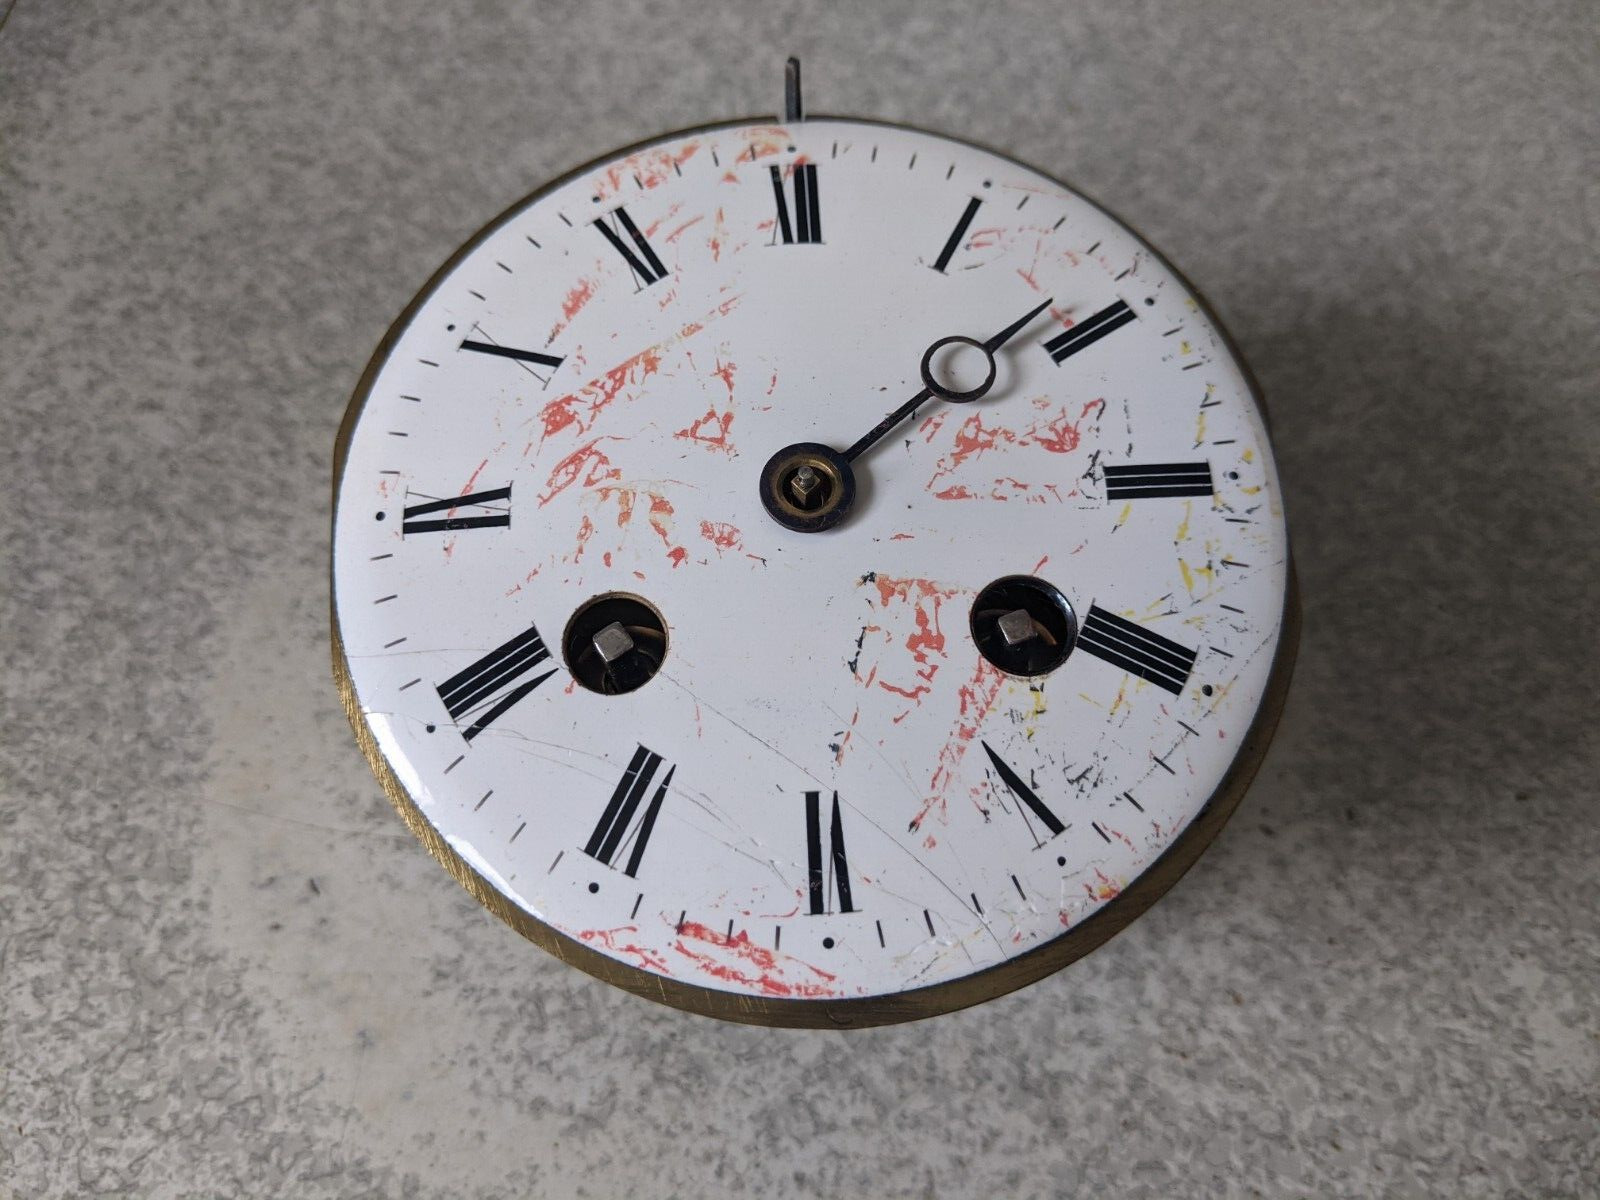 VINTAGE / ANTIQUE BRASS CLOCK MOVEMENT -  JAPY FRERES  - SPARES REPAIRS -